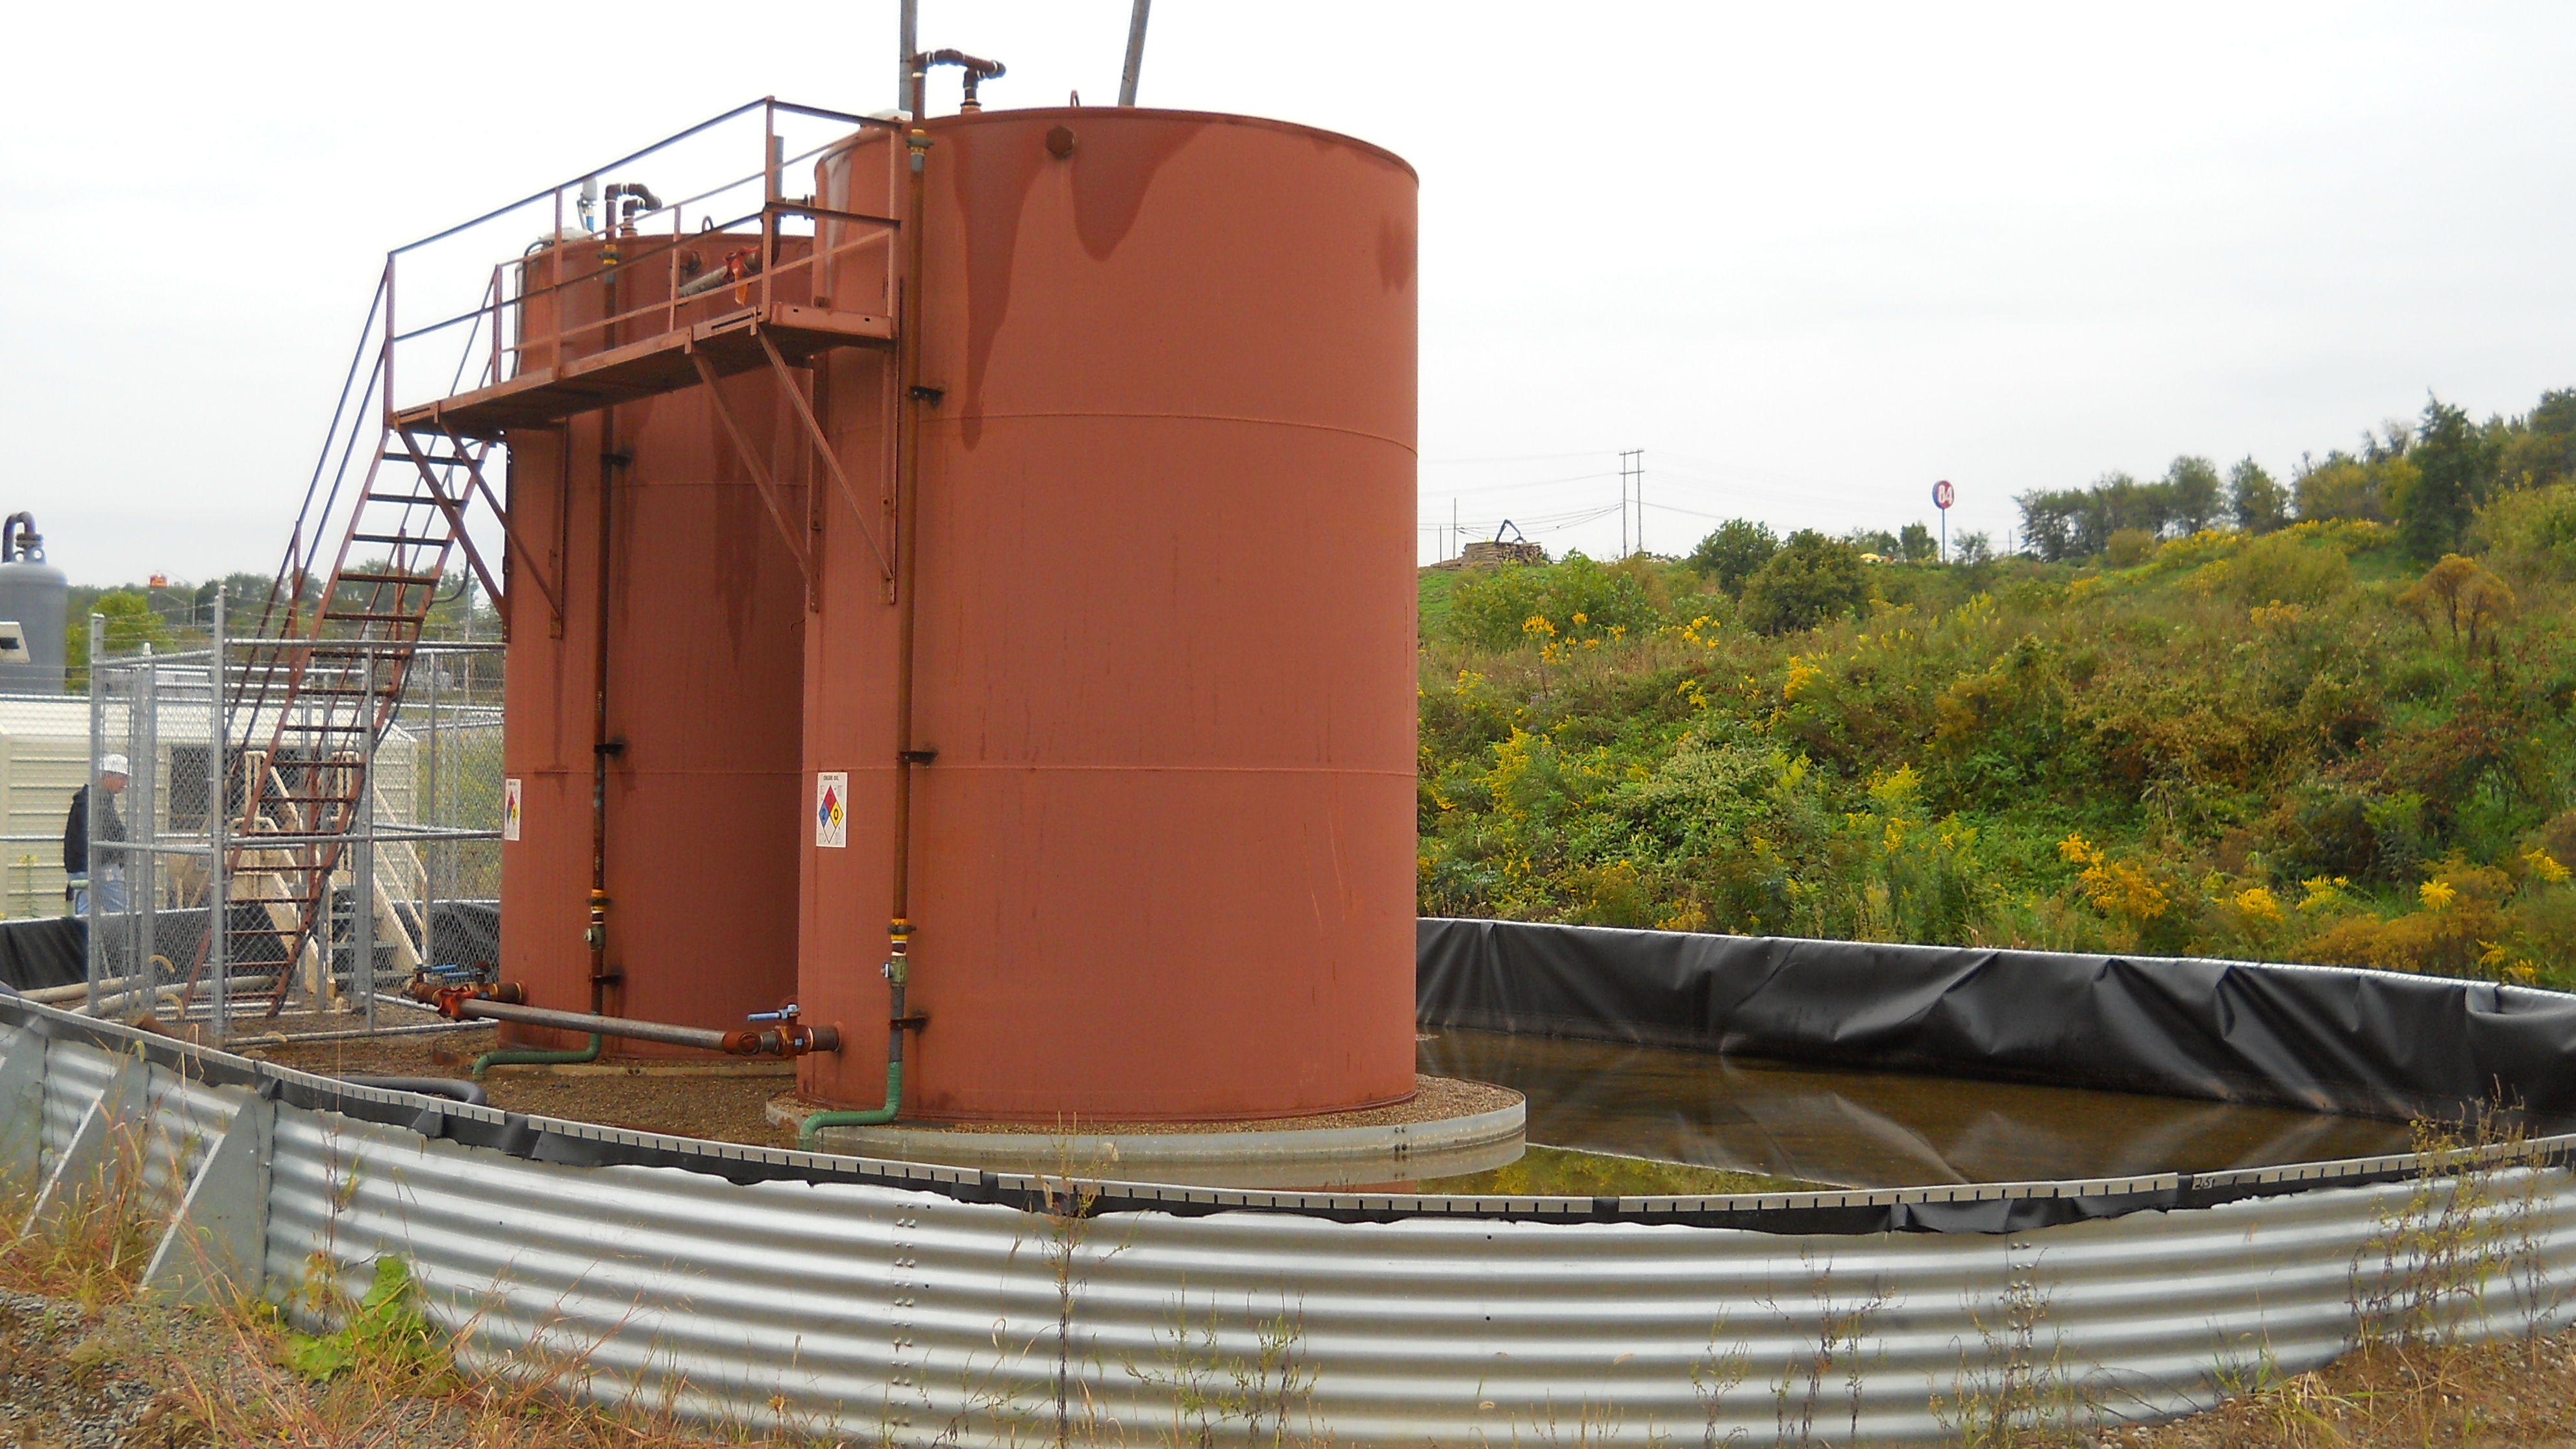 Storage tanks for produced water from natural gas drilling in the Marcellus Shale of Western Pennsylvania are surrounded by spill-containment structures.